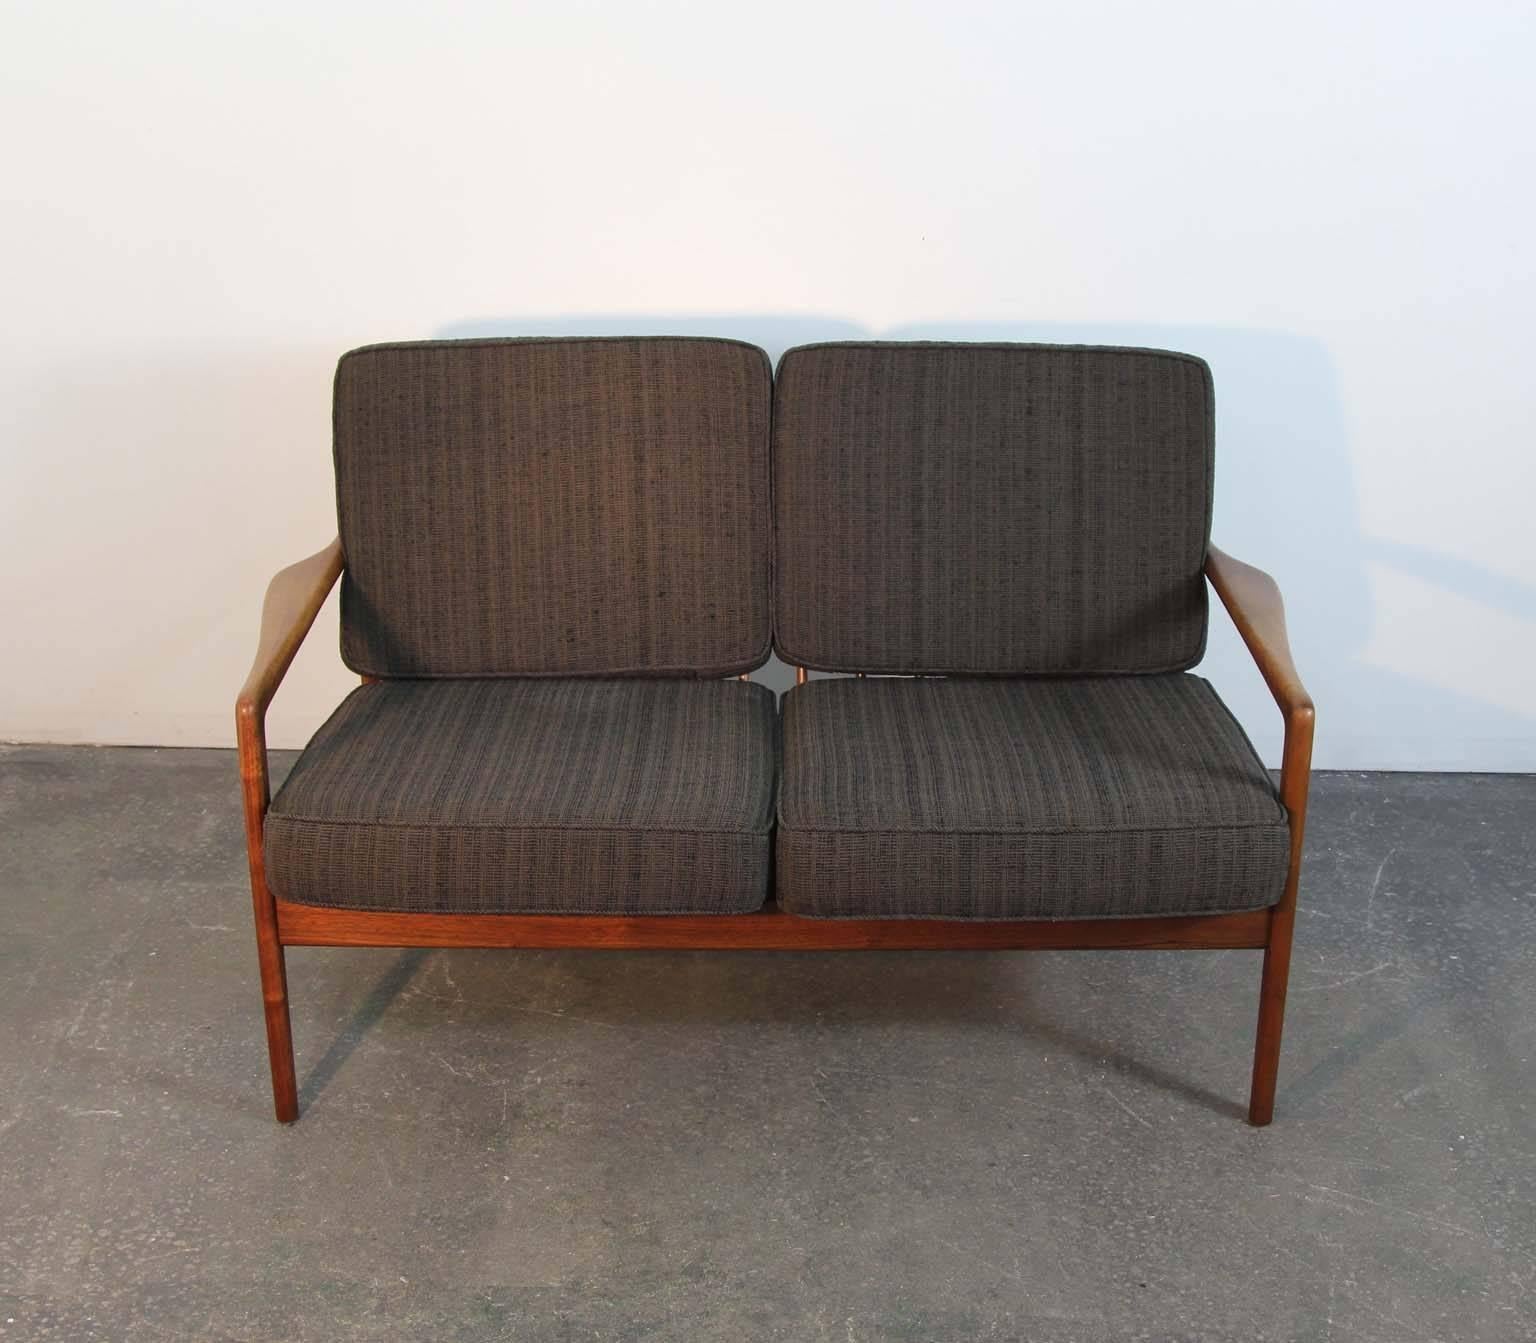 Two-seat settee and lounge chair by Folke Ohlsson for DUX. Teak frames have been treated to a re-oiling and are in good vintage condition with very minor marks from use. Sculptural joinery of frames are in excellent sturdy shape. New premium Pirelli